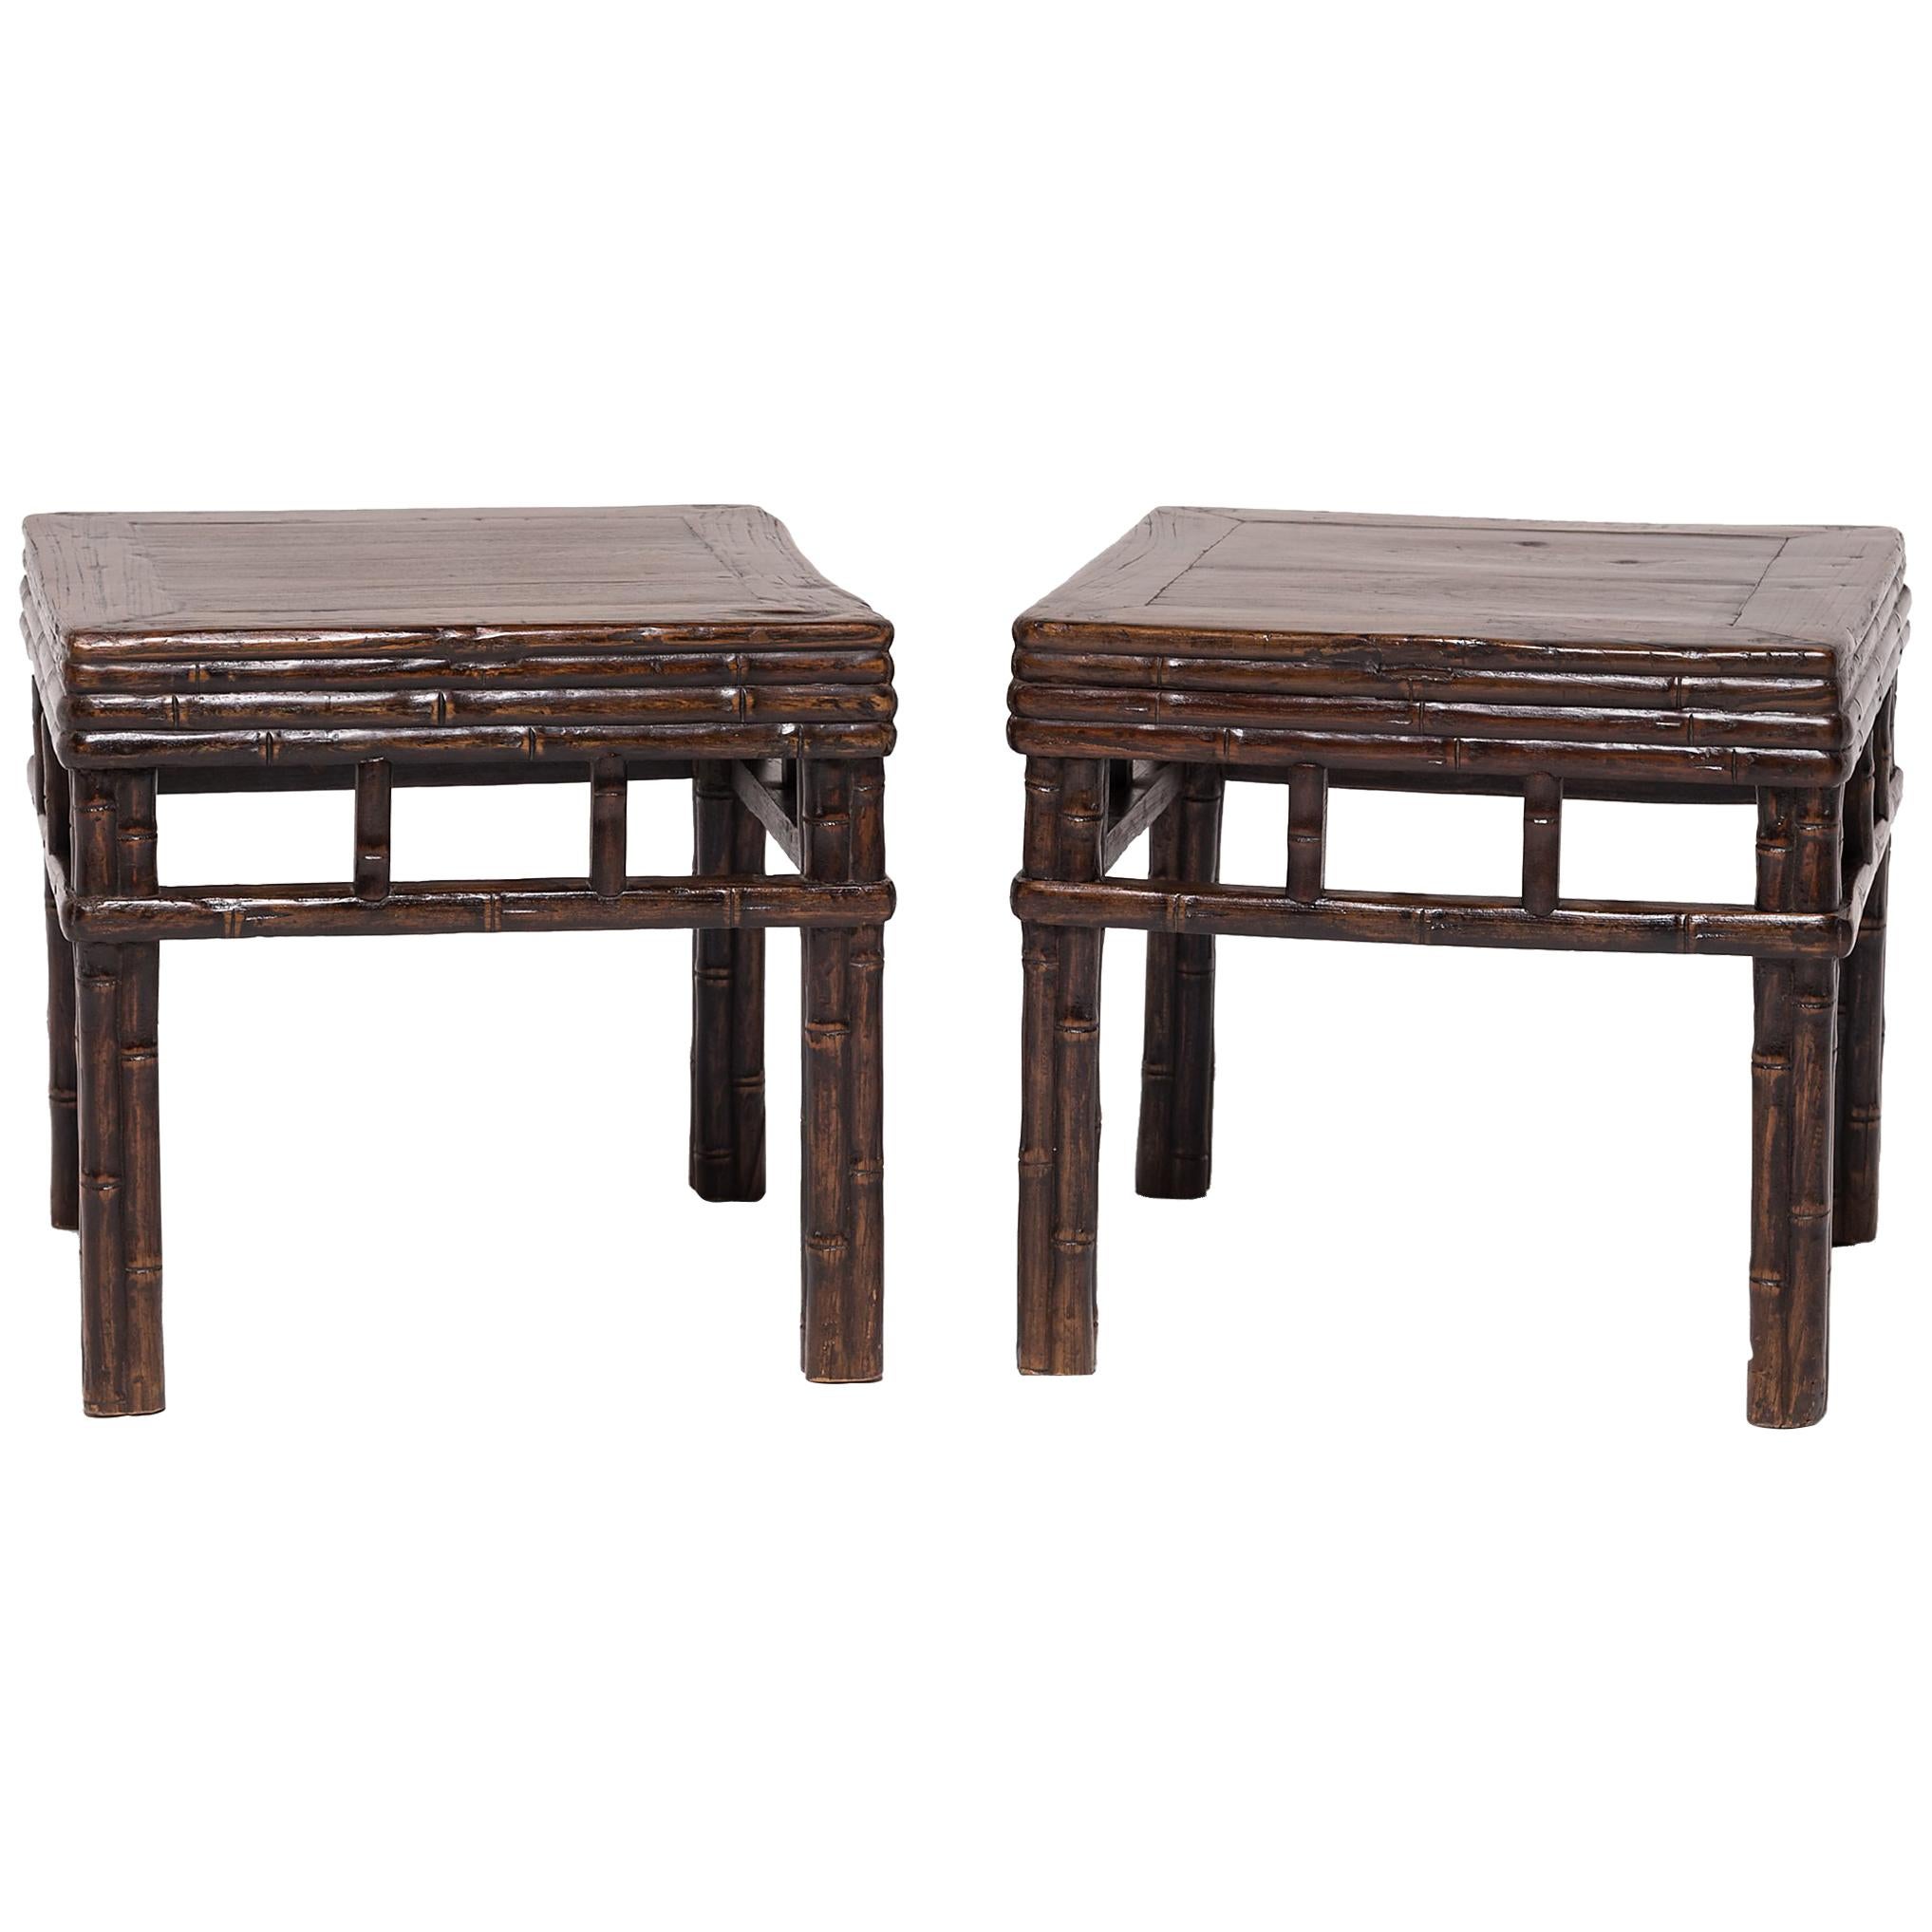 Pair of 19th Century Chinese Carved Bamboo Square Stools